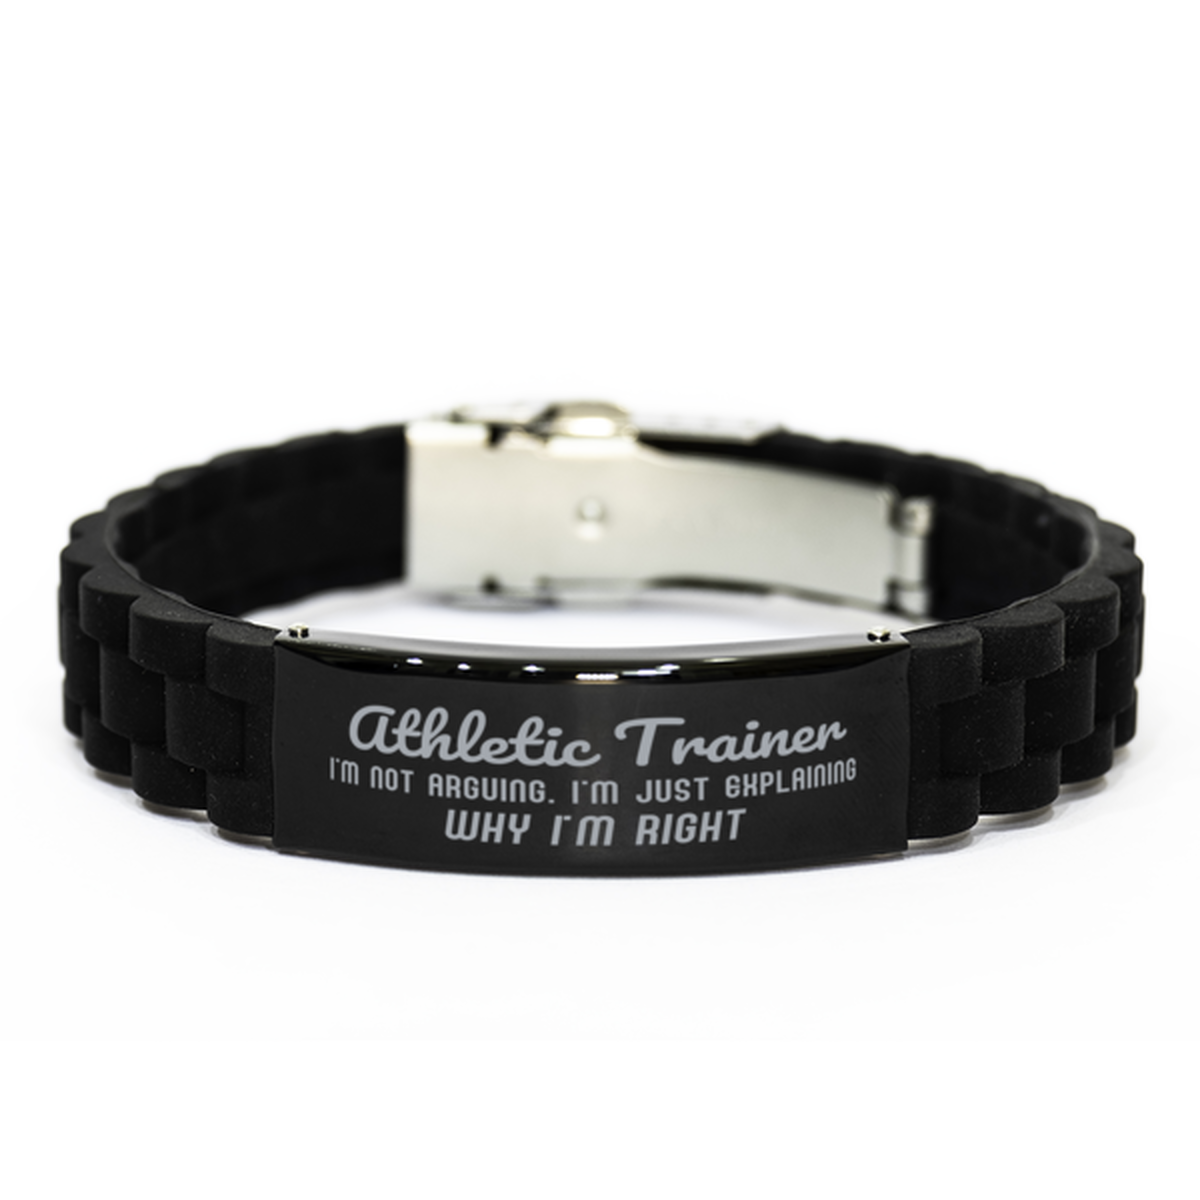 Athletic Trainer I'm not Arguing. I'm Just Explaining Why I'm RIGHT Black Glidelock Clasp Bracelet, Funny Saying Quote Athletic Trainer Gifts For Athletic Trainer Graduation Birthday Christmas Gifts for Men Women Coworker